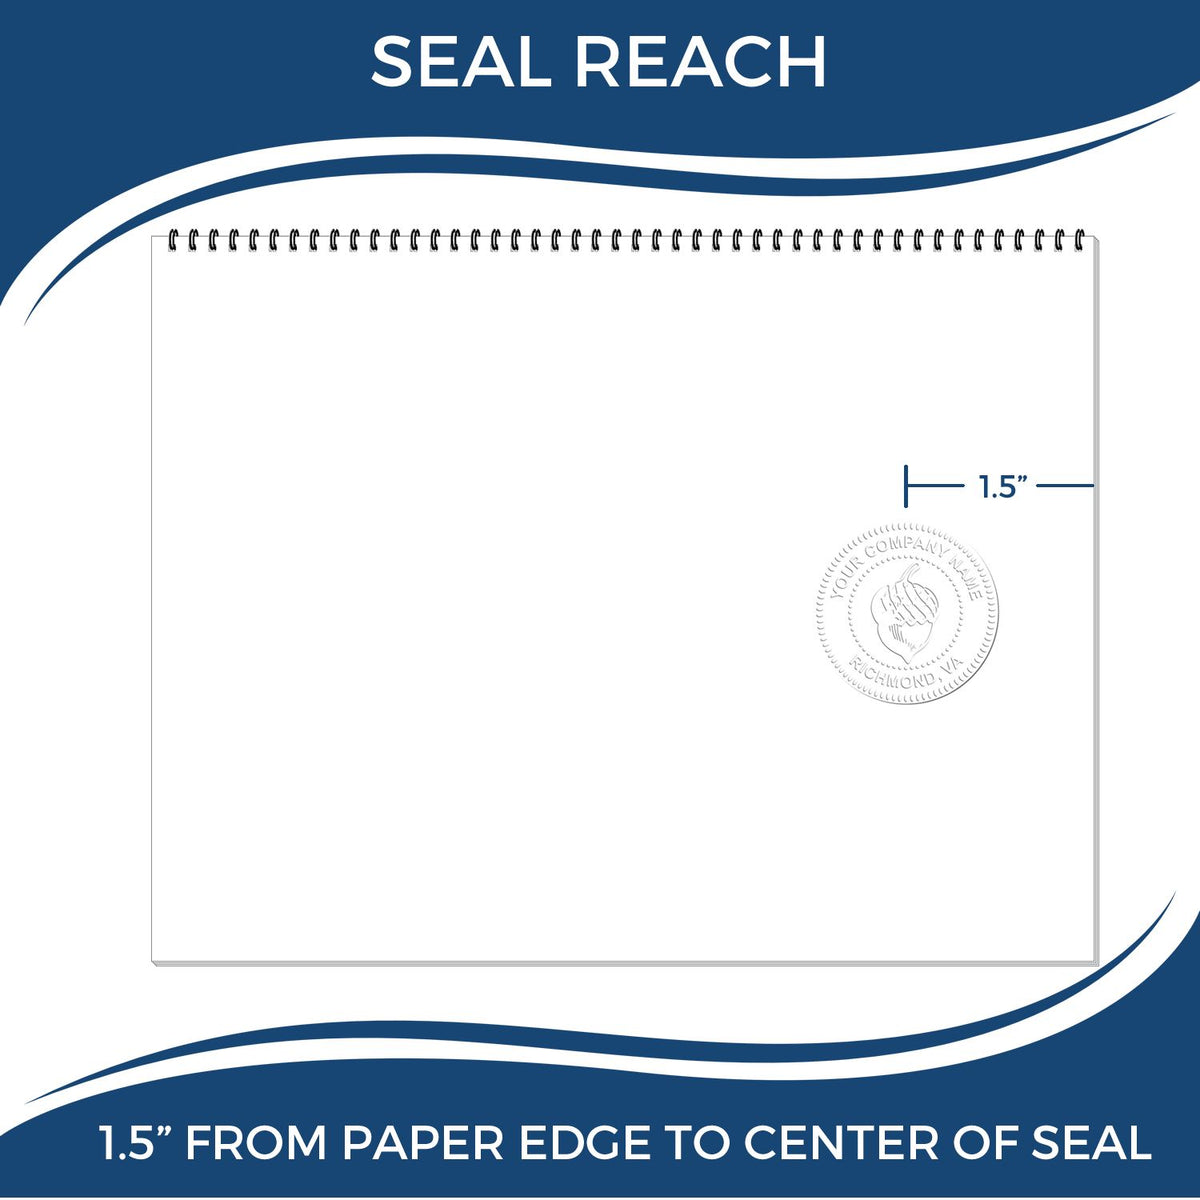 An infographic showing the seal reach which is represented by a ruler and a miniature seal image of the Handheld New Mexico Architect Seal Embosser